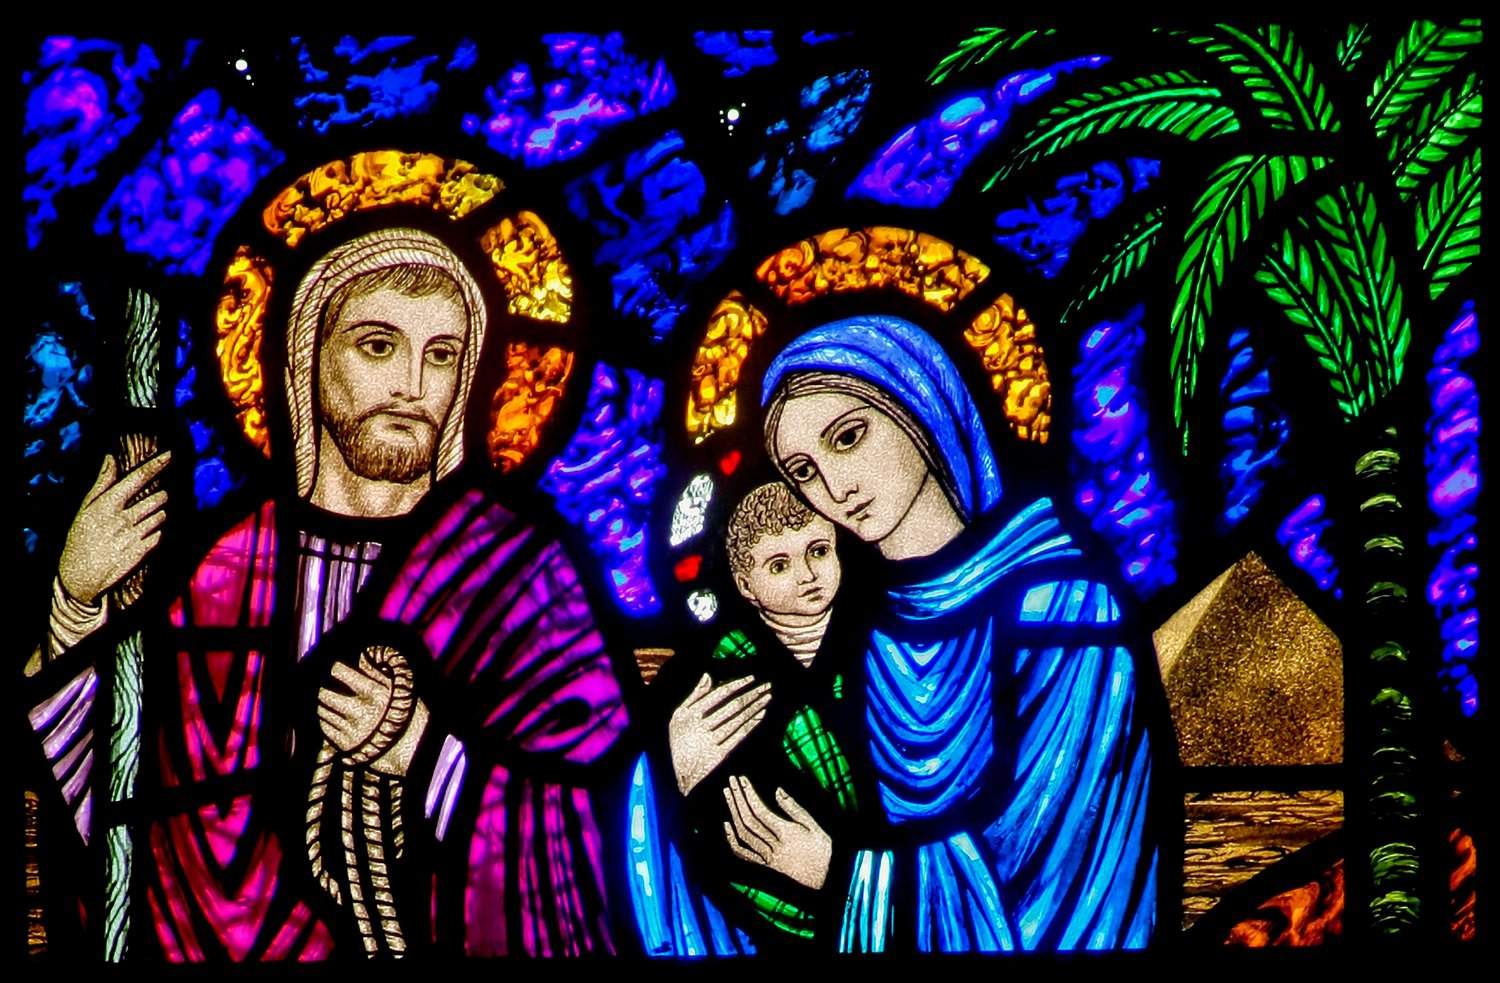 A detail of a stained-glass window from St. Edward's Church in Seattle shows Jesus, Mary and Joseph on their flight into Egypt. (CNS illustration/Crosiers)